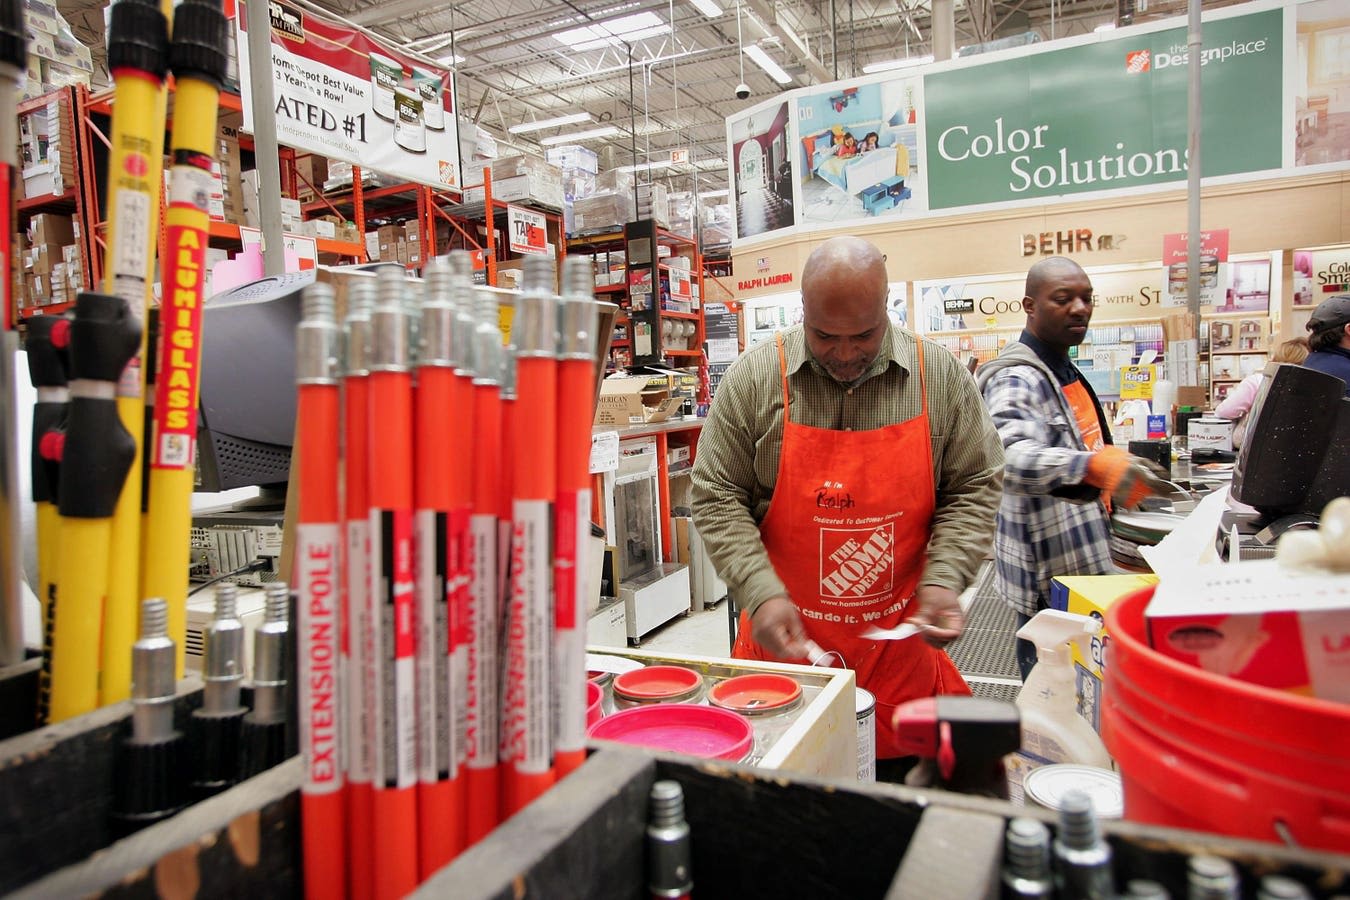 Consumers Say The Home Depot Is The Most Culturally Inclusive Brand